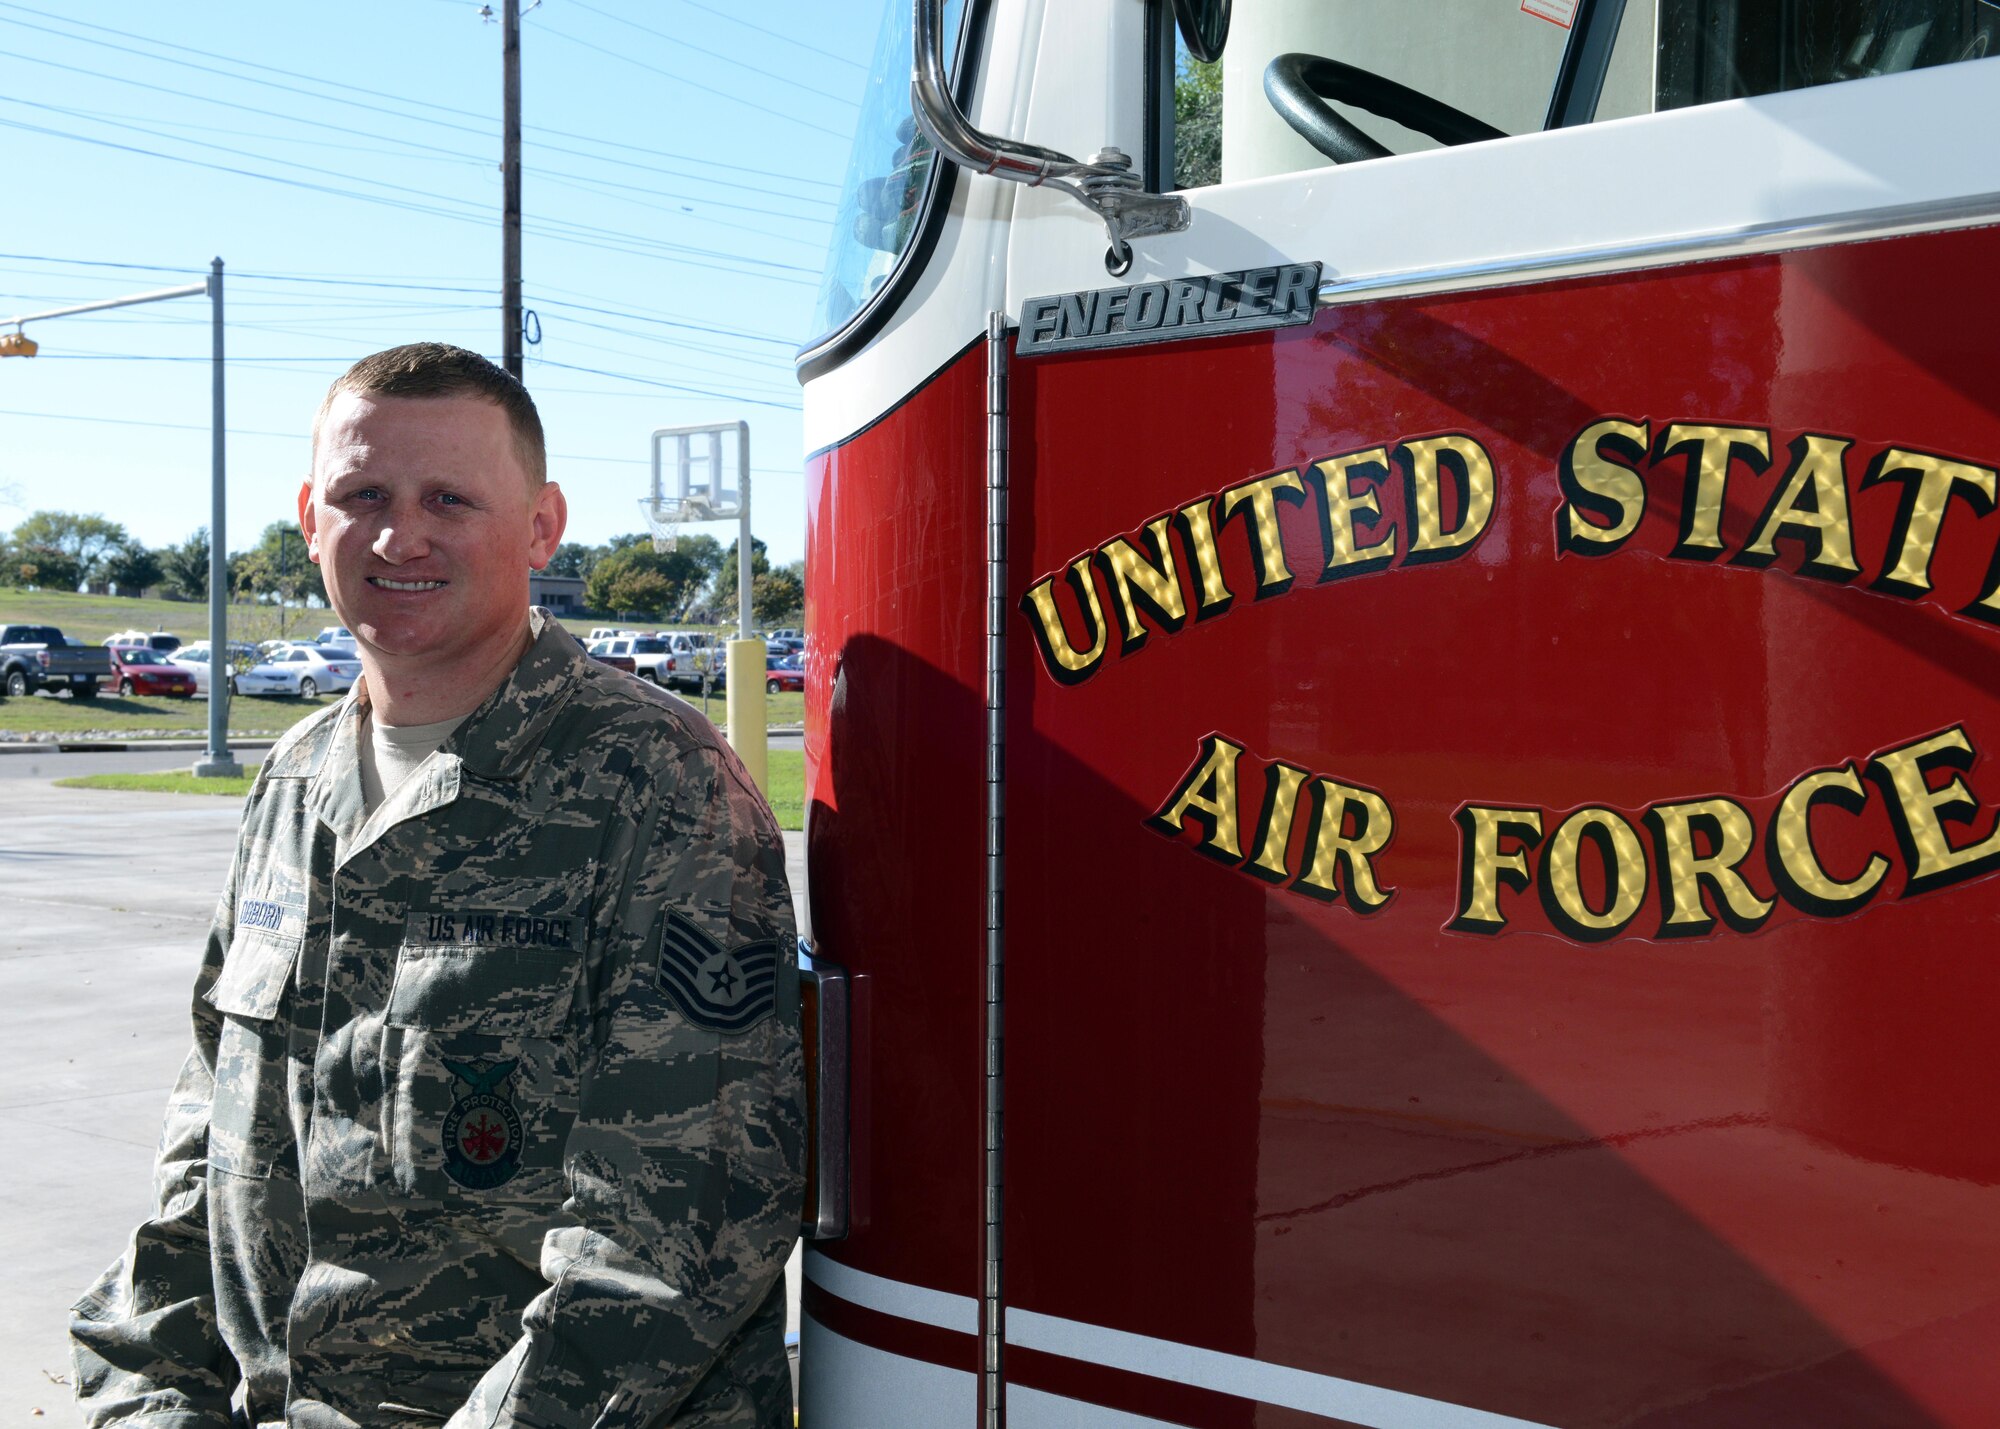 Tech. Sgt. Patrick Ogborn, 47th Civil Engineer Squadron Fire Department assistant chief of “A” shift, poses for a photo at Laughlin Air Force Base, Texas, Dec. 3, 2015. Ogborn was awarded the Maj. Gen. Eugene A. Lupia Award, which is given for superior technical competence and job performance. (U.S. Air Force photo by Senior Airman Jimmie D. Pike)